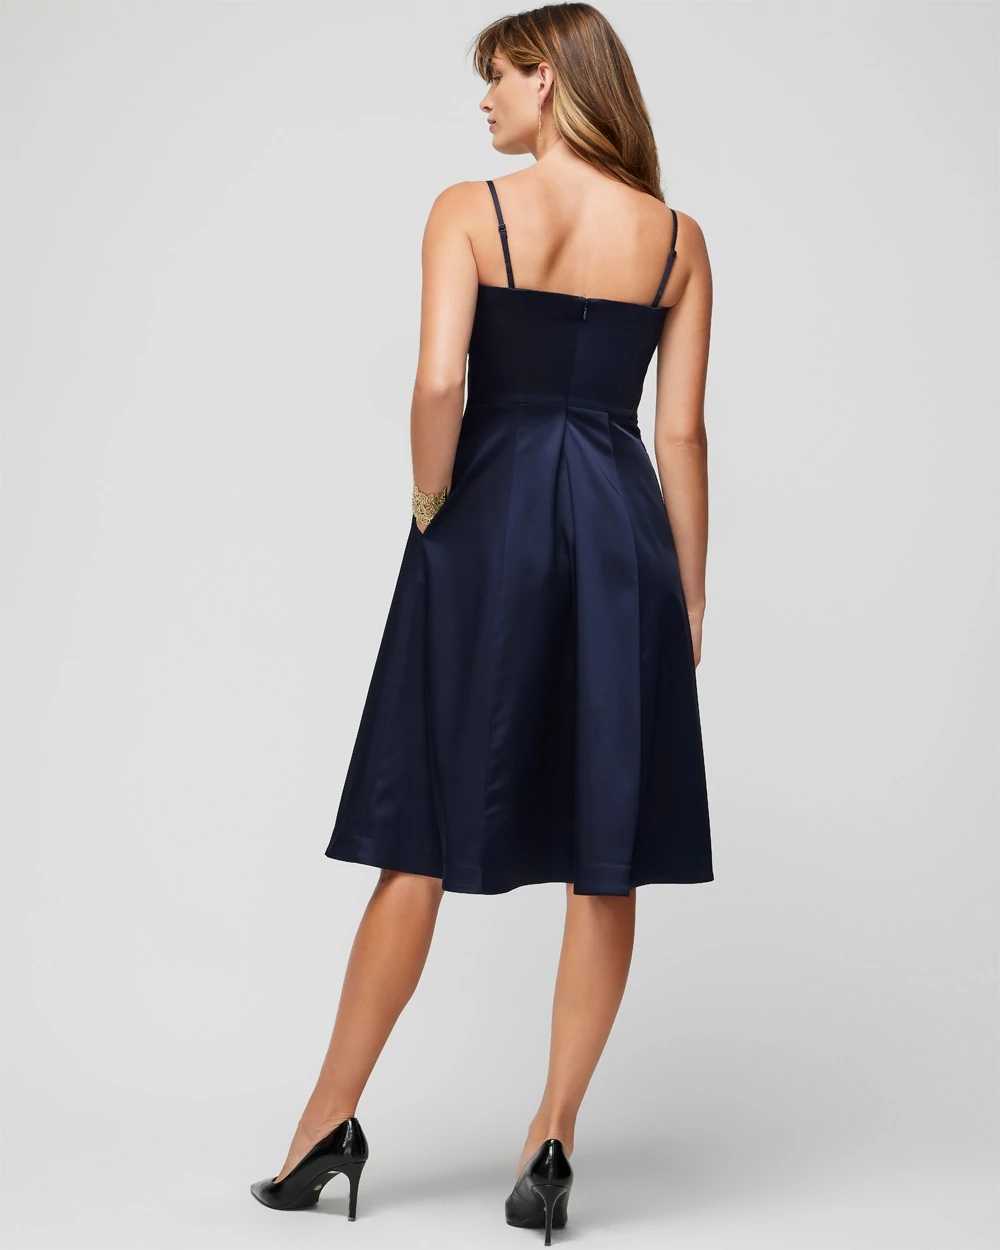 Sleeveless Satin Draped Fit-and-Flare Midi Dress click to view larger image.